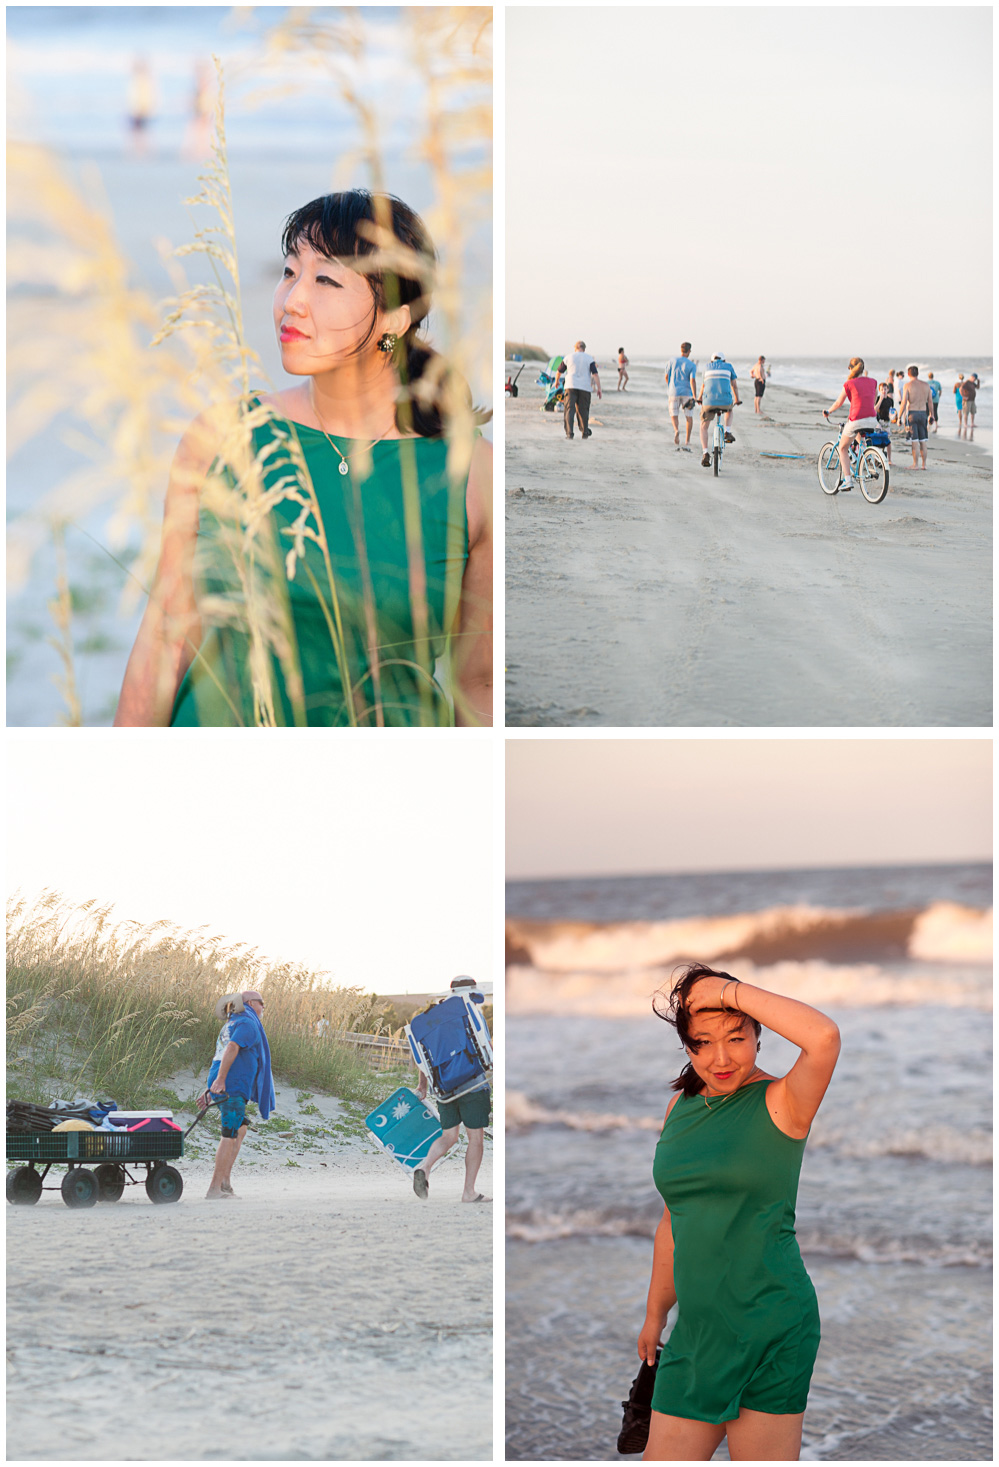 Four photos of Dannie exploring the beach on Tybee Island before sunset